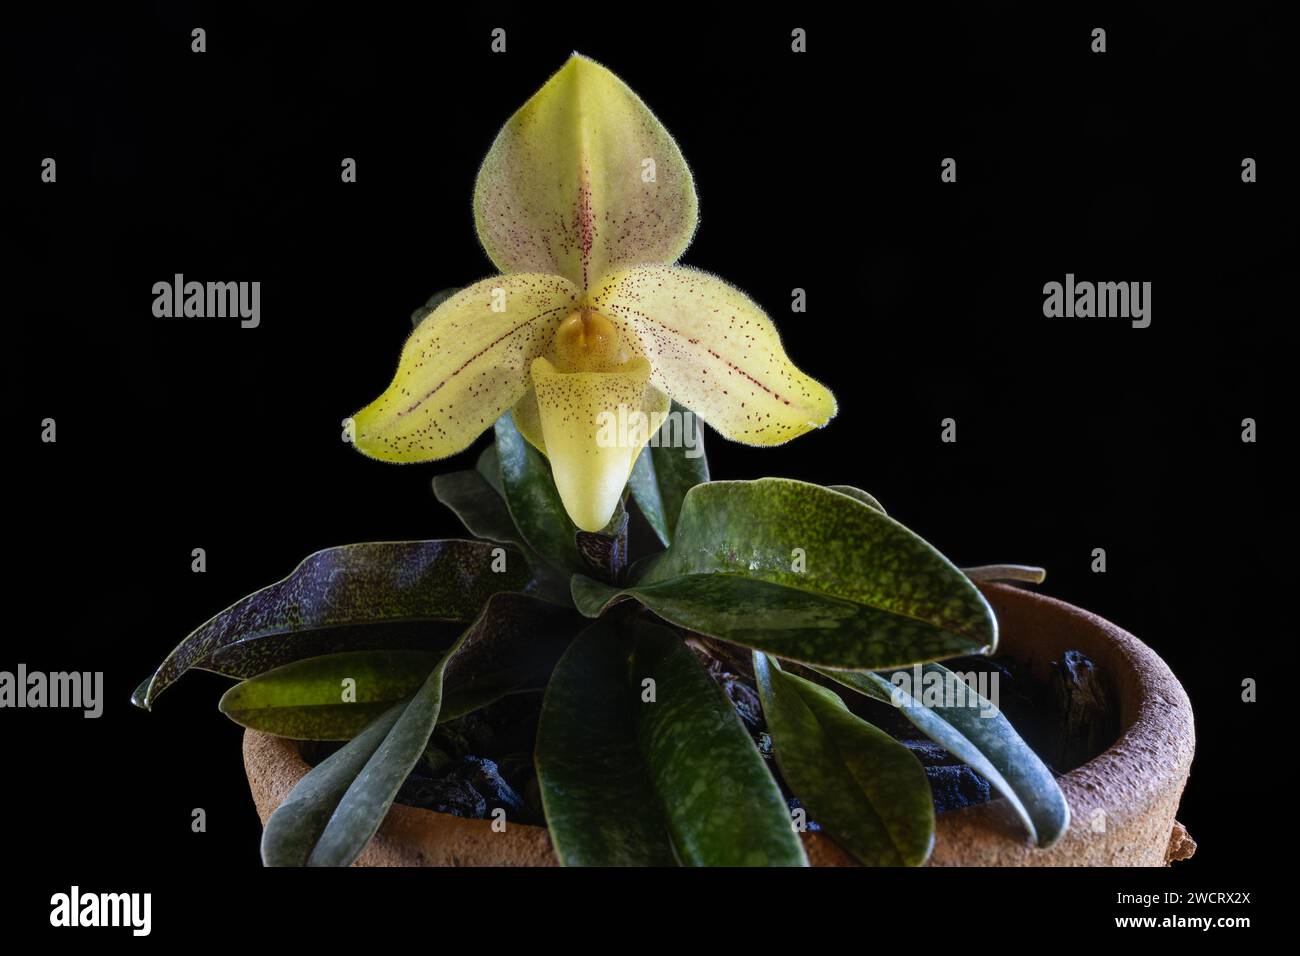 Closeup view of potted lady slipper orchid species paphiopedilum concolor striatum blooming with yellow and red flower isolated on black background Stock Photo